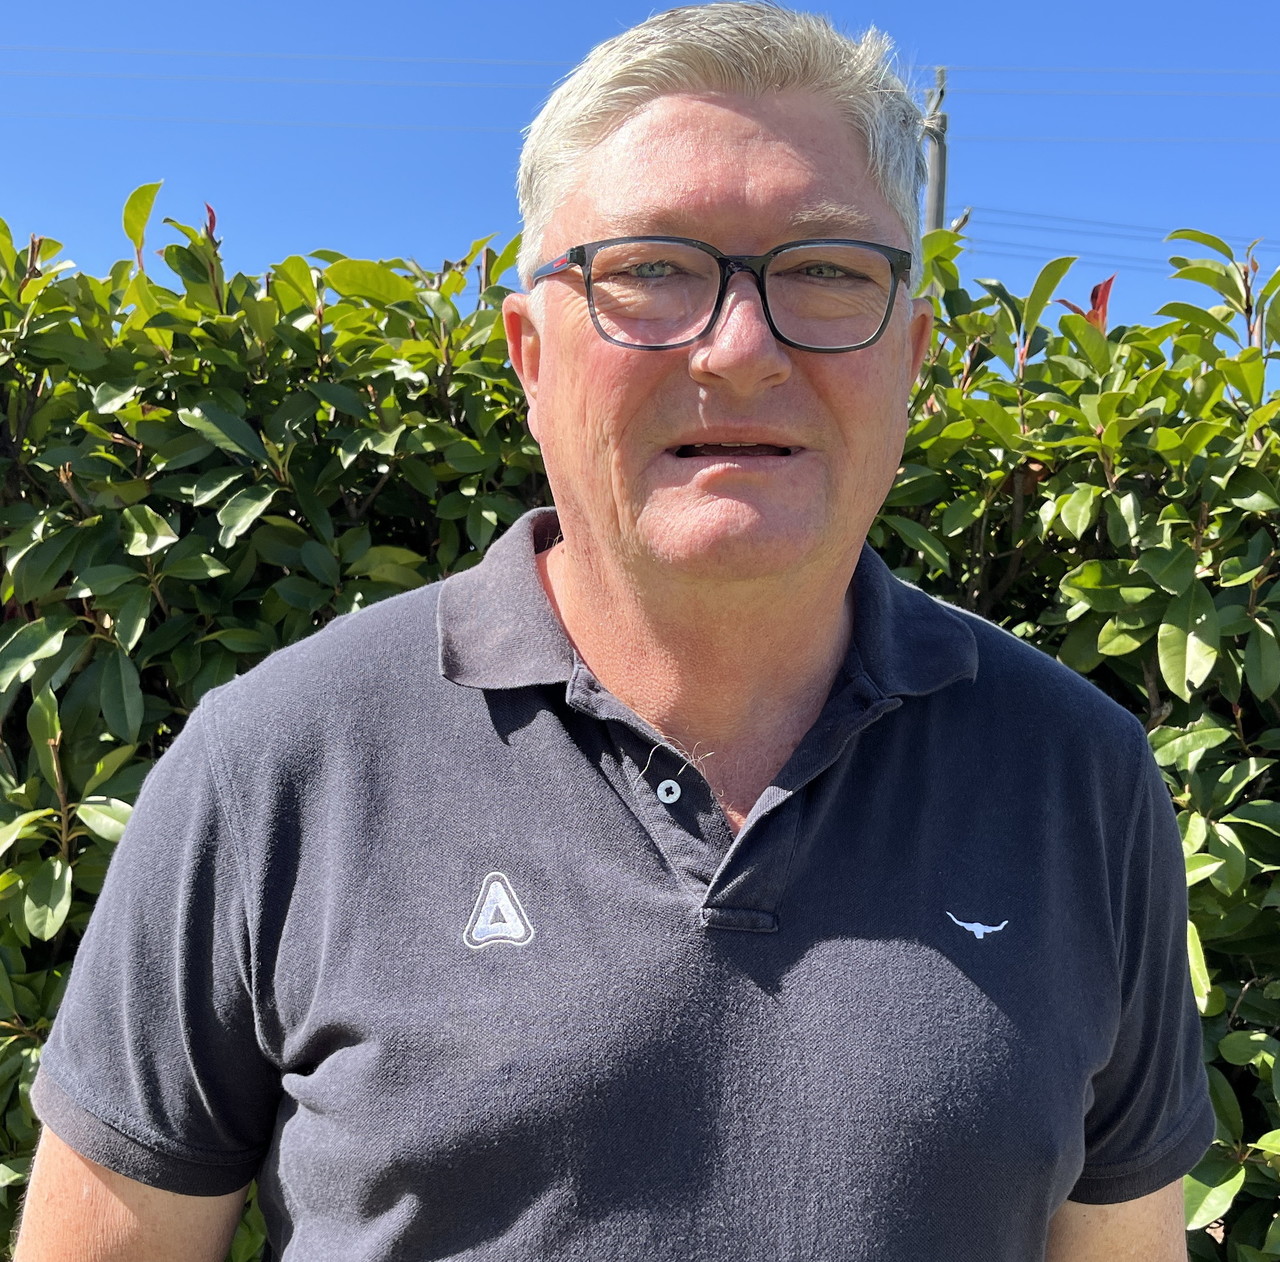 Jim O’Connor, Market Development Manager with ADAMA Australia in Southern Queensland, says the introduction of Grindstone herbicide, offering a solo formulation of aminopyralid, has allowed growers the flexibility to create their own post-emergent herbicide brews for controlling broadleaf weeds in cereals.